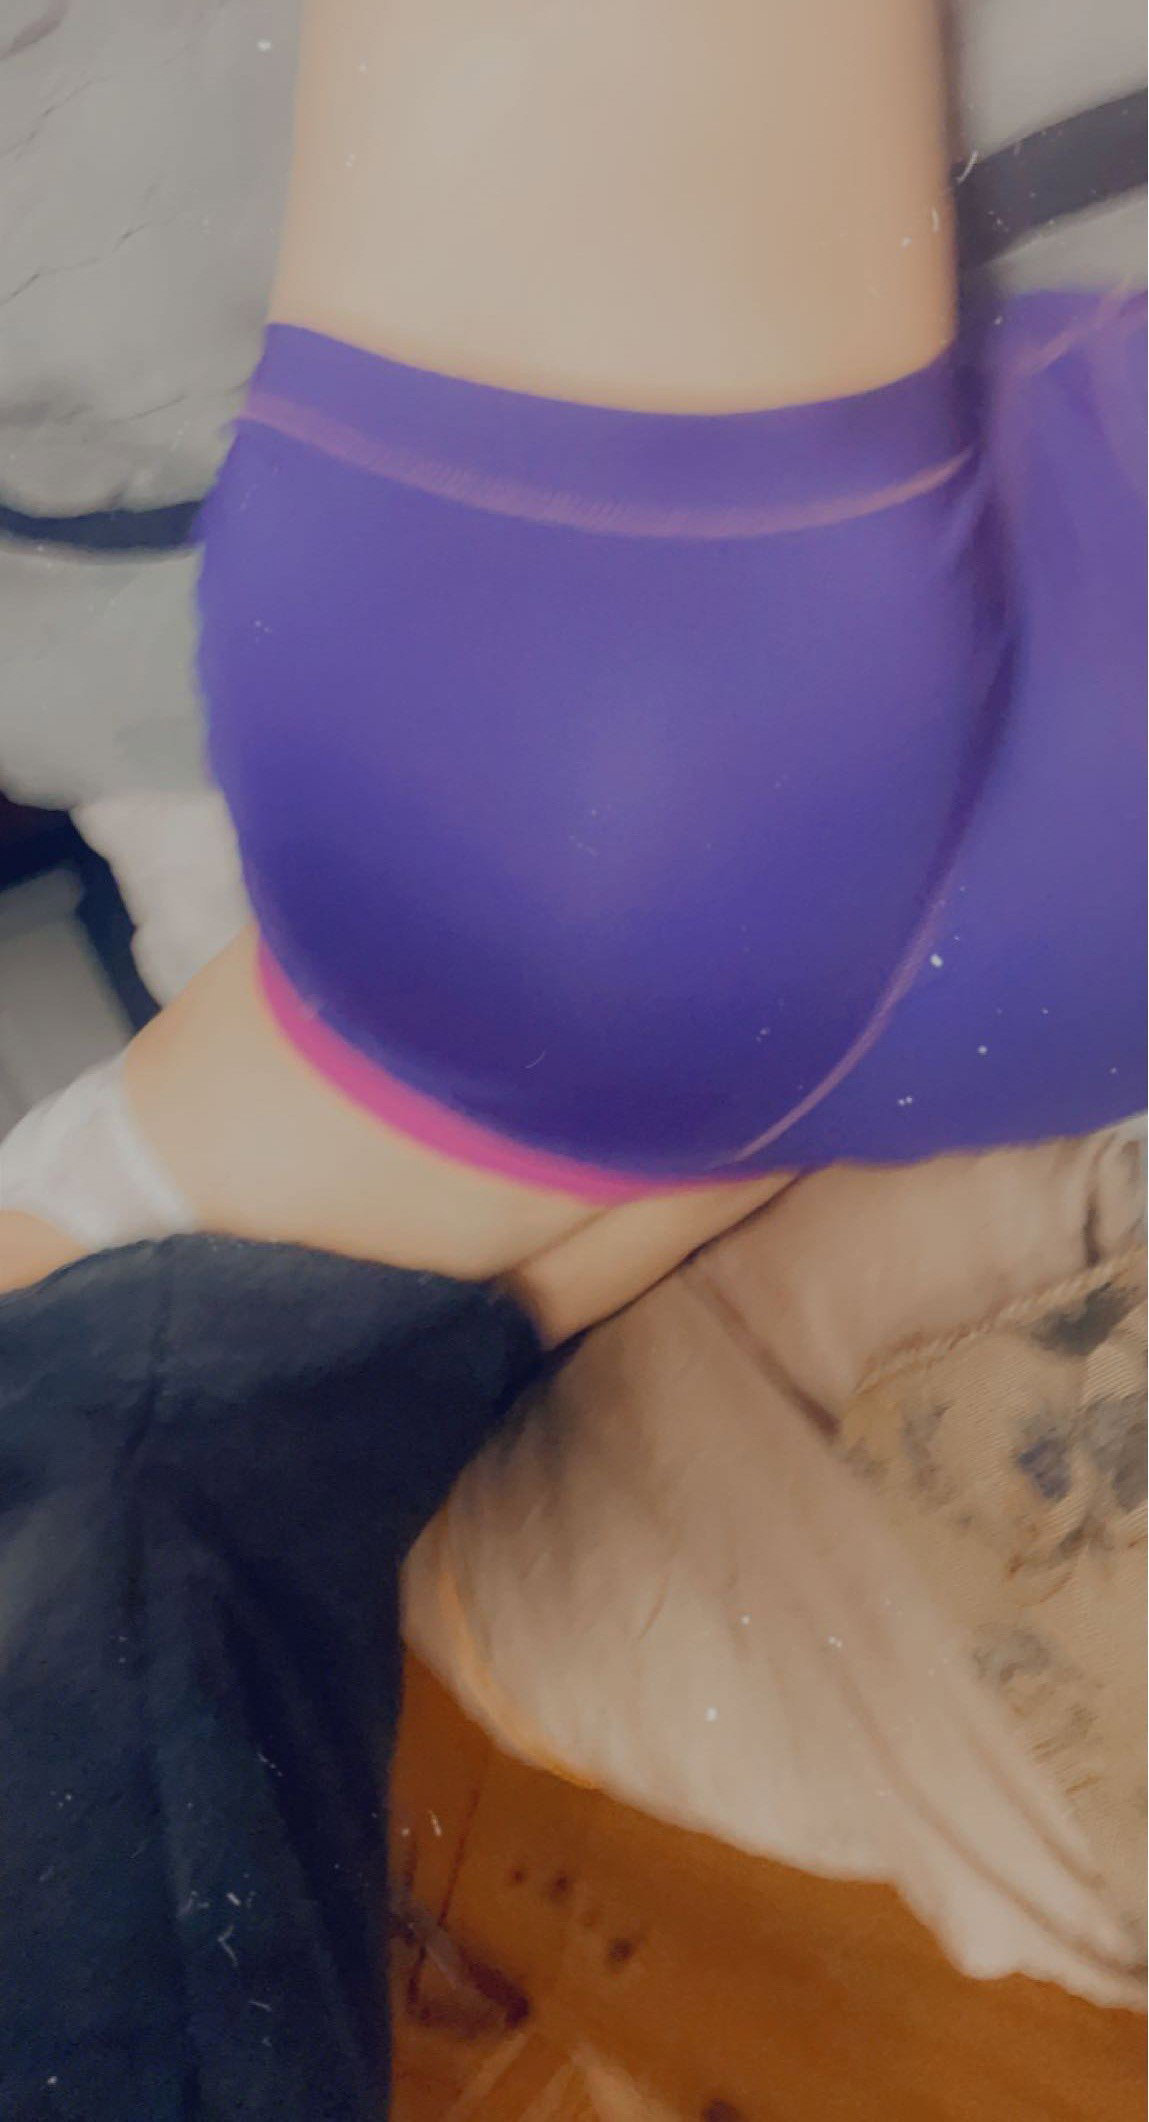 Photo by Sjcutie11 with the username @Sjcutie11,  March 29, 2022 at 12:34 PM. The post is about the topic Sissy and the text says 'first post! hope you all enjoy!'